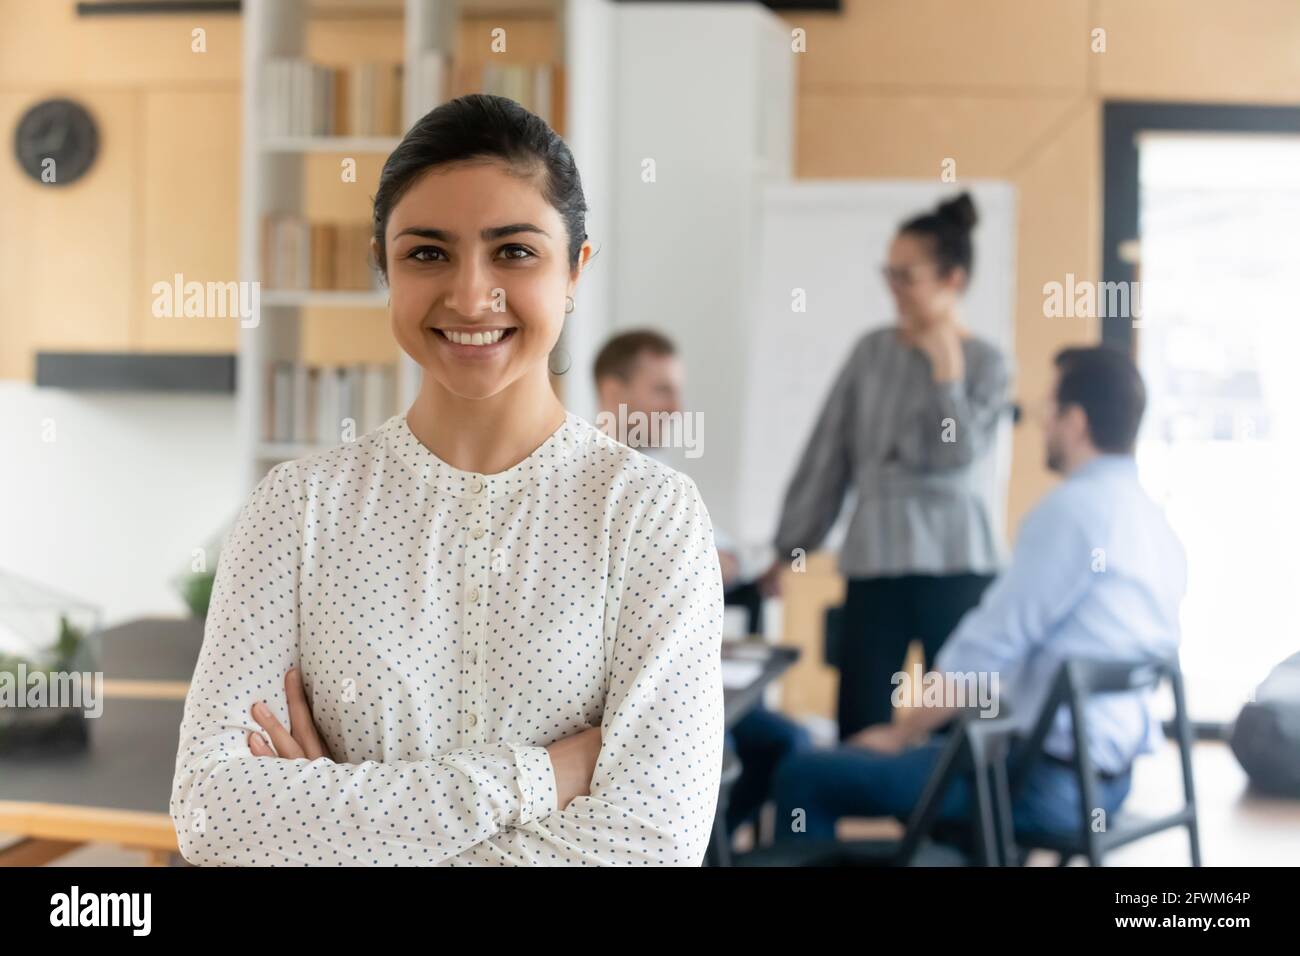 Head shot portrait smiling confident Indian businesswoman with arms crossed Stock Photo